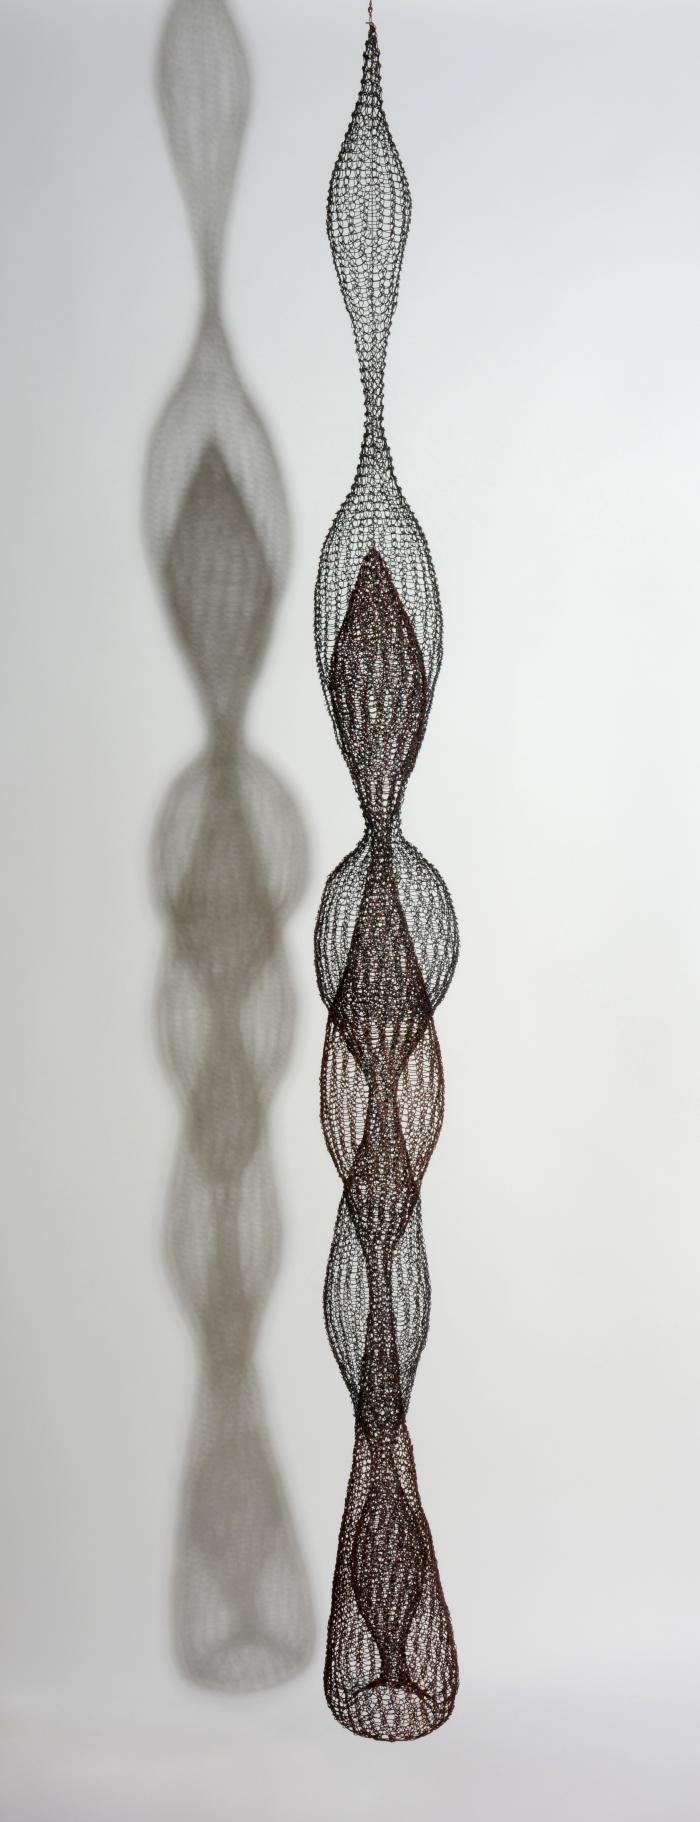 Untitled (S.373, Hanging Six-Lobed, Multilayered Interlocking Continuous Form within a Form)